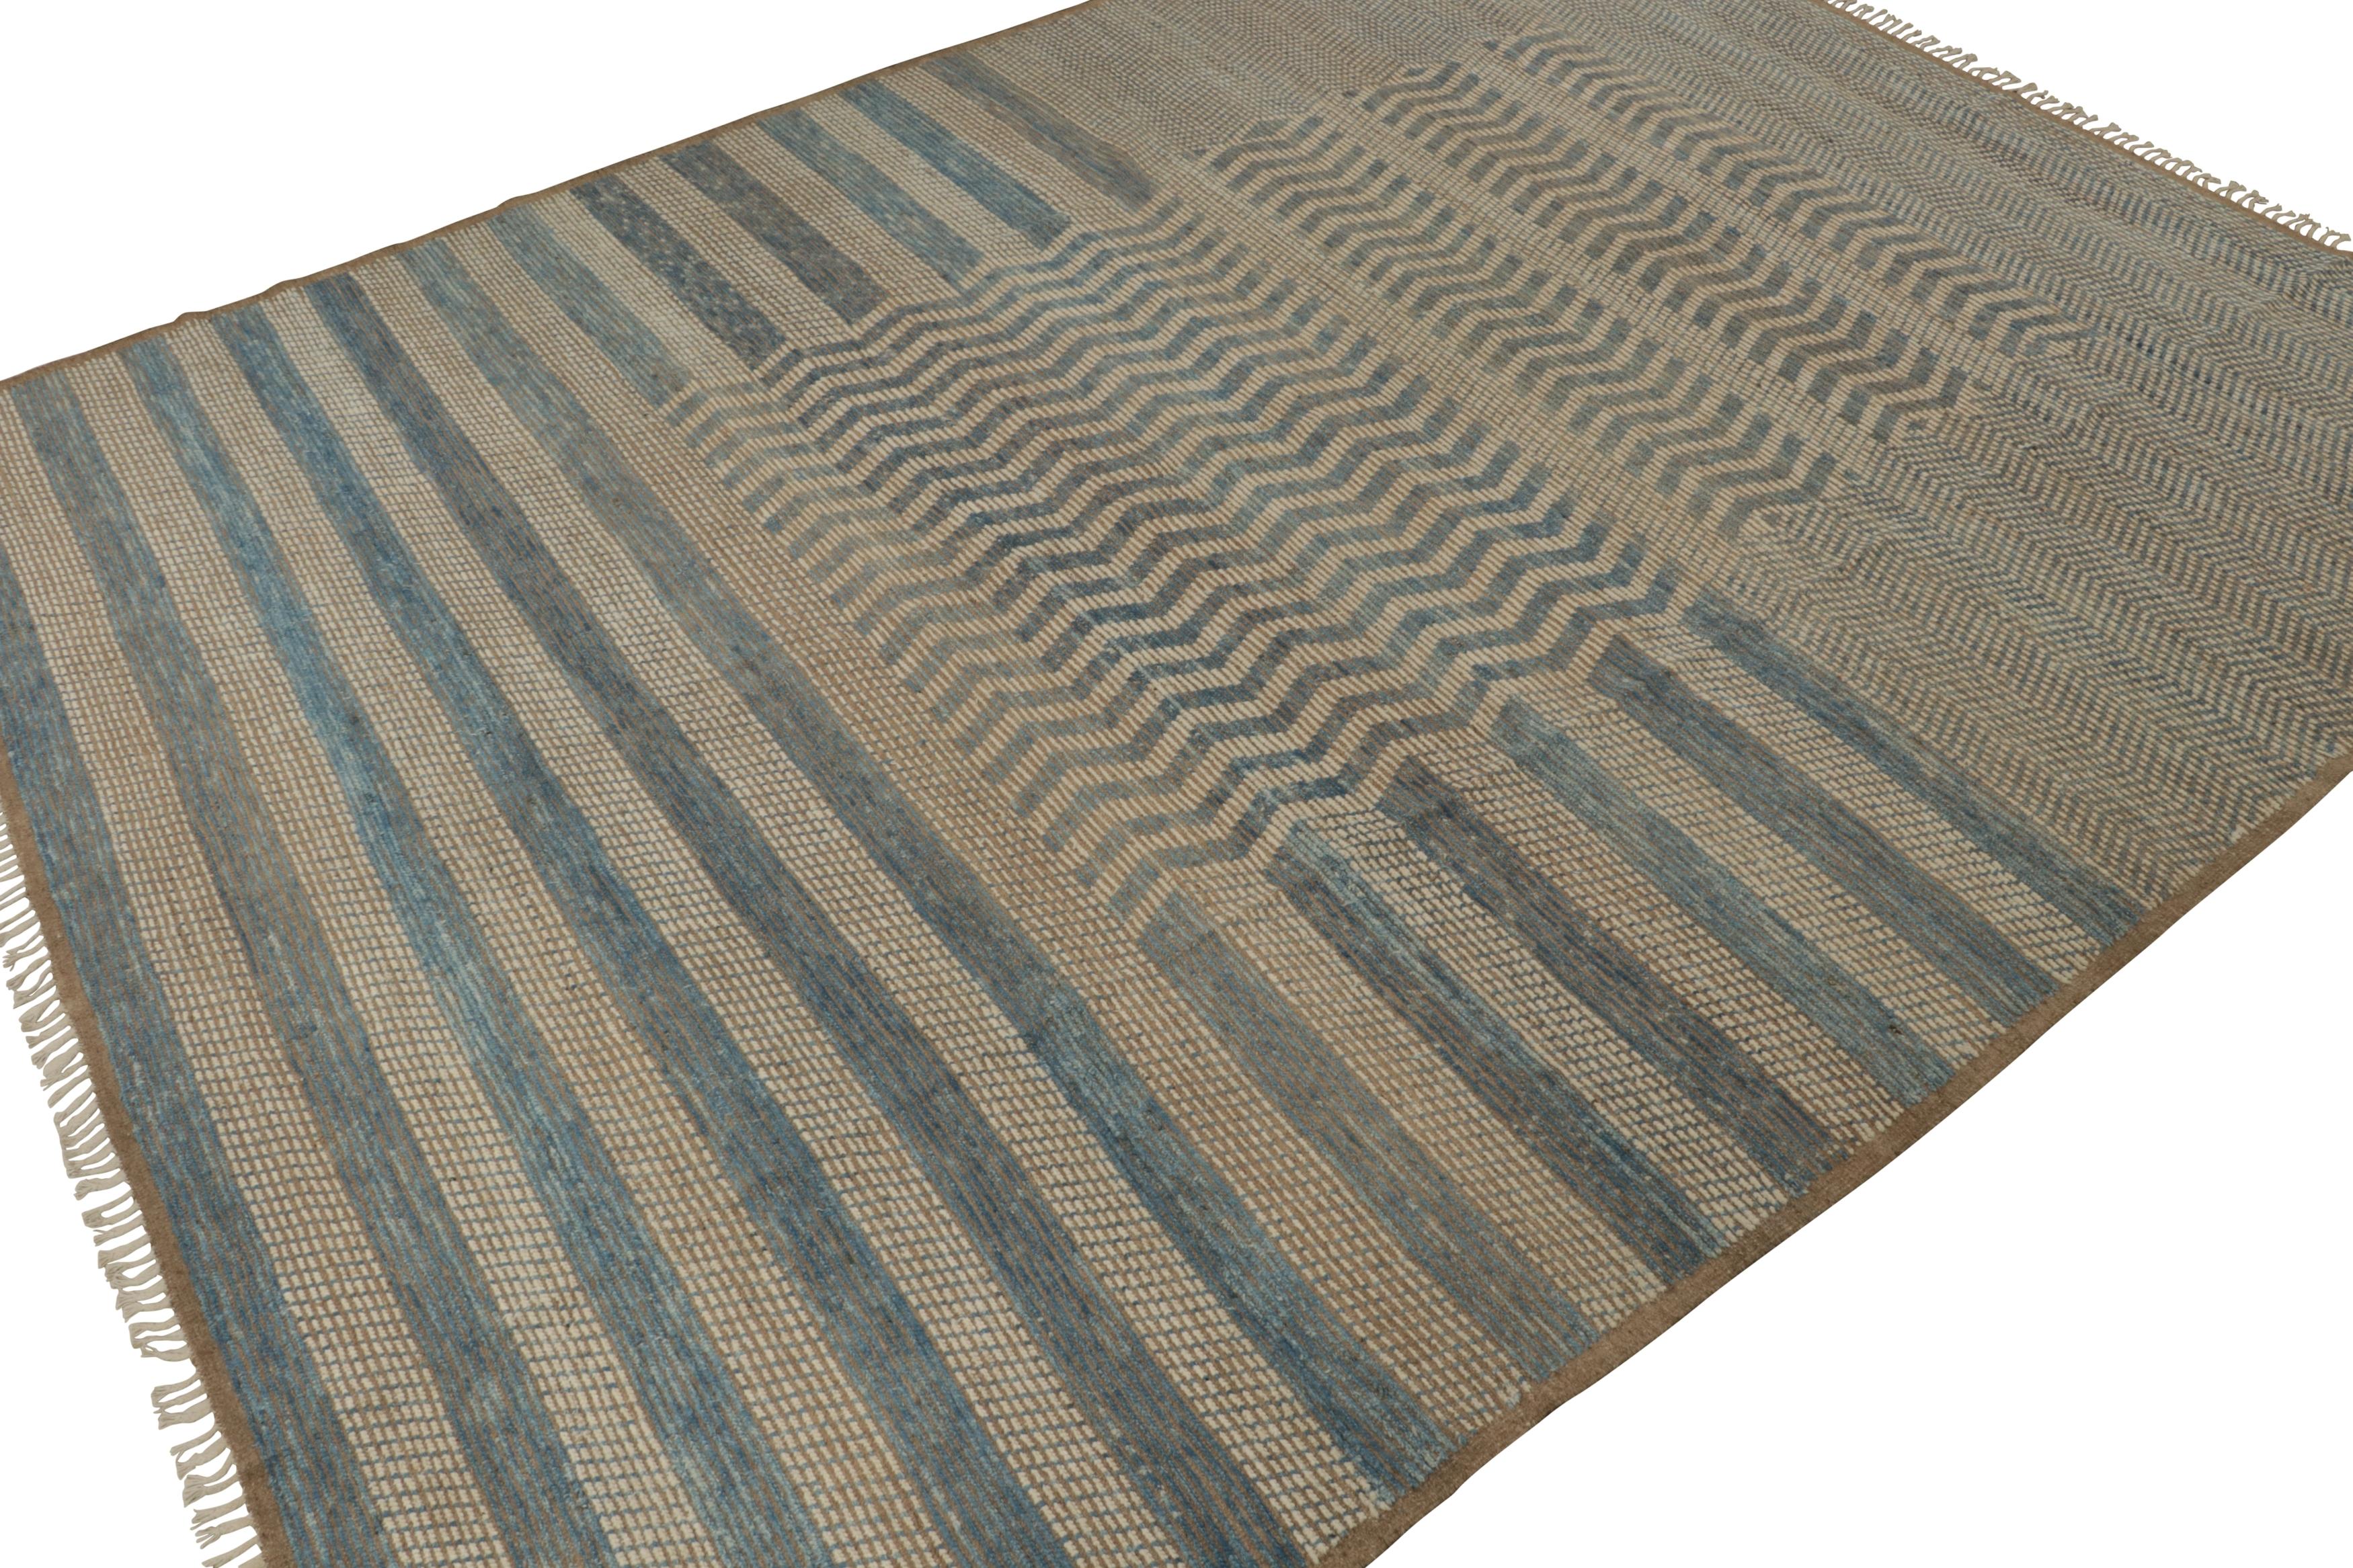 This hand-knotted wool 12x15 rug is a new release from the Moroccan rug collection by Rug & Kilim. Its design represents our modern take on primitivist Berber carpets, and enjoys beige-brown, off-white and blue stripes and chevrons. 

On the Design: